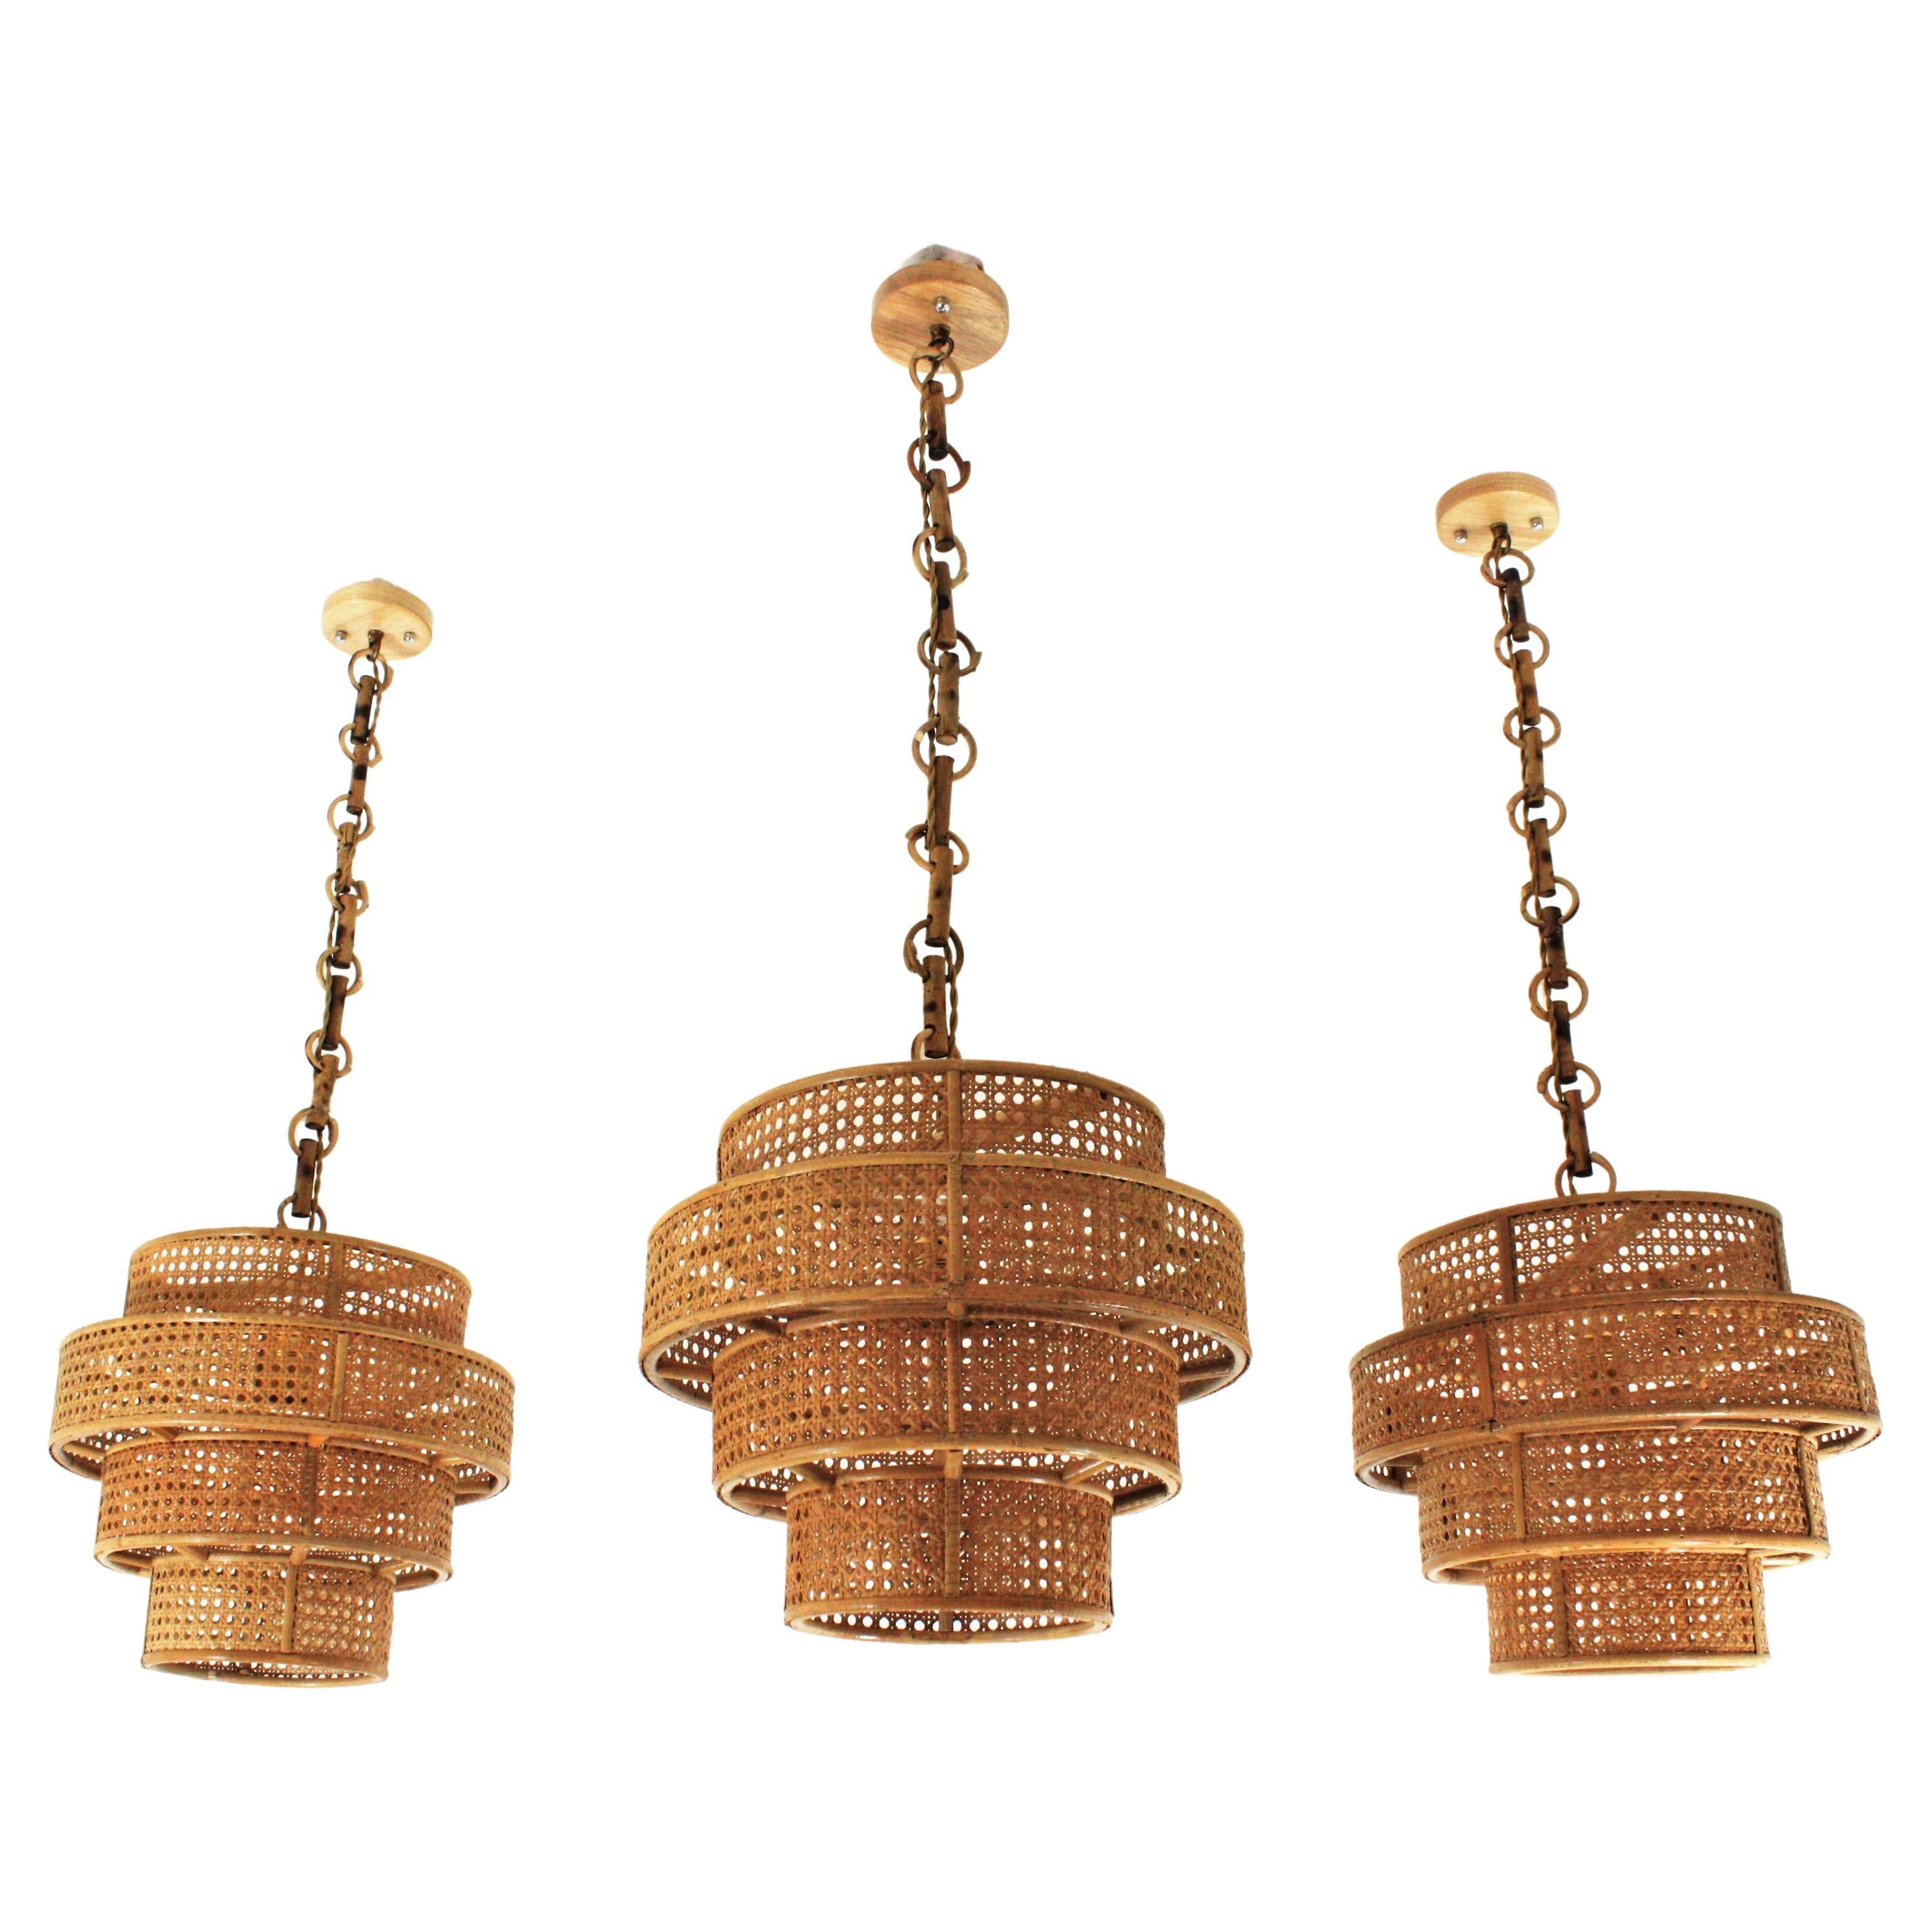 Large Rattan Wicker and Rattan Pendants, Set of Three
Set of three Rattan Wicker Weave Concentric Cylinder Pendant Hanging Lights. Italy, 1960s
Eye-catching set of handcrafted wicker weave concentric cylinder ceiling suspension lamps.
These